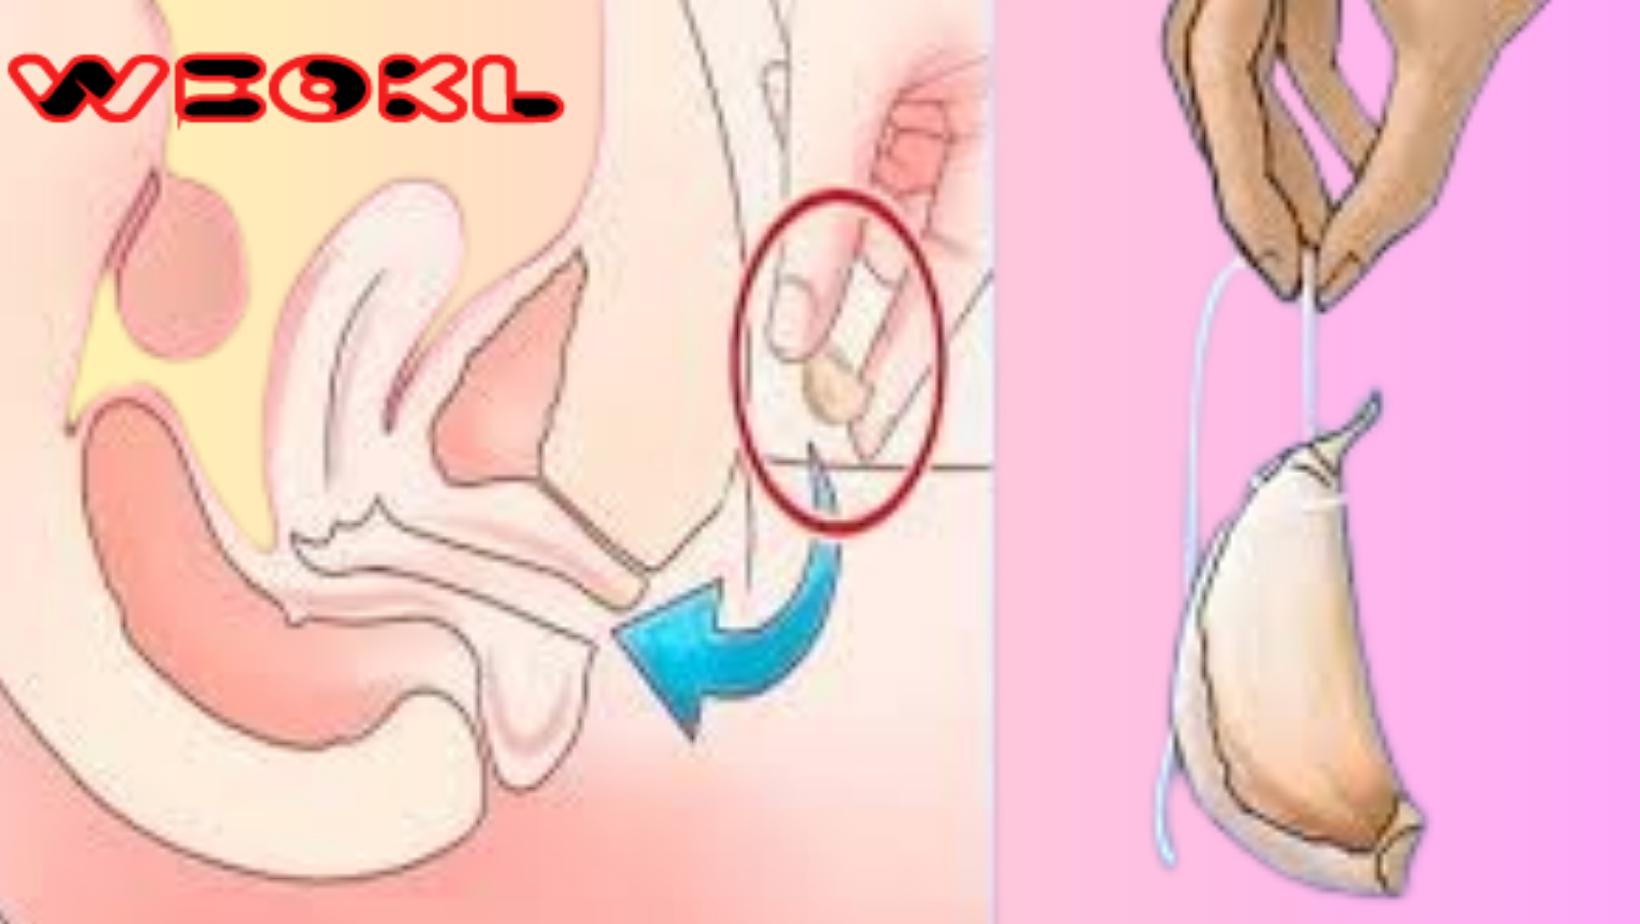 PUT A PIECE OF GARLIC IN THIS PART OF YOUR BODY